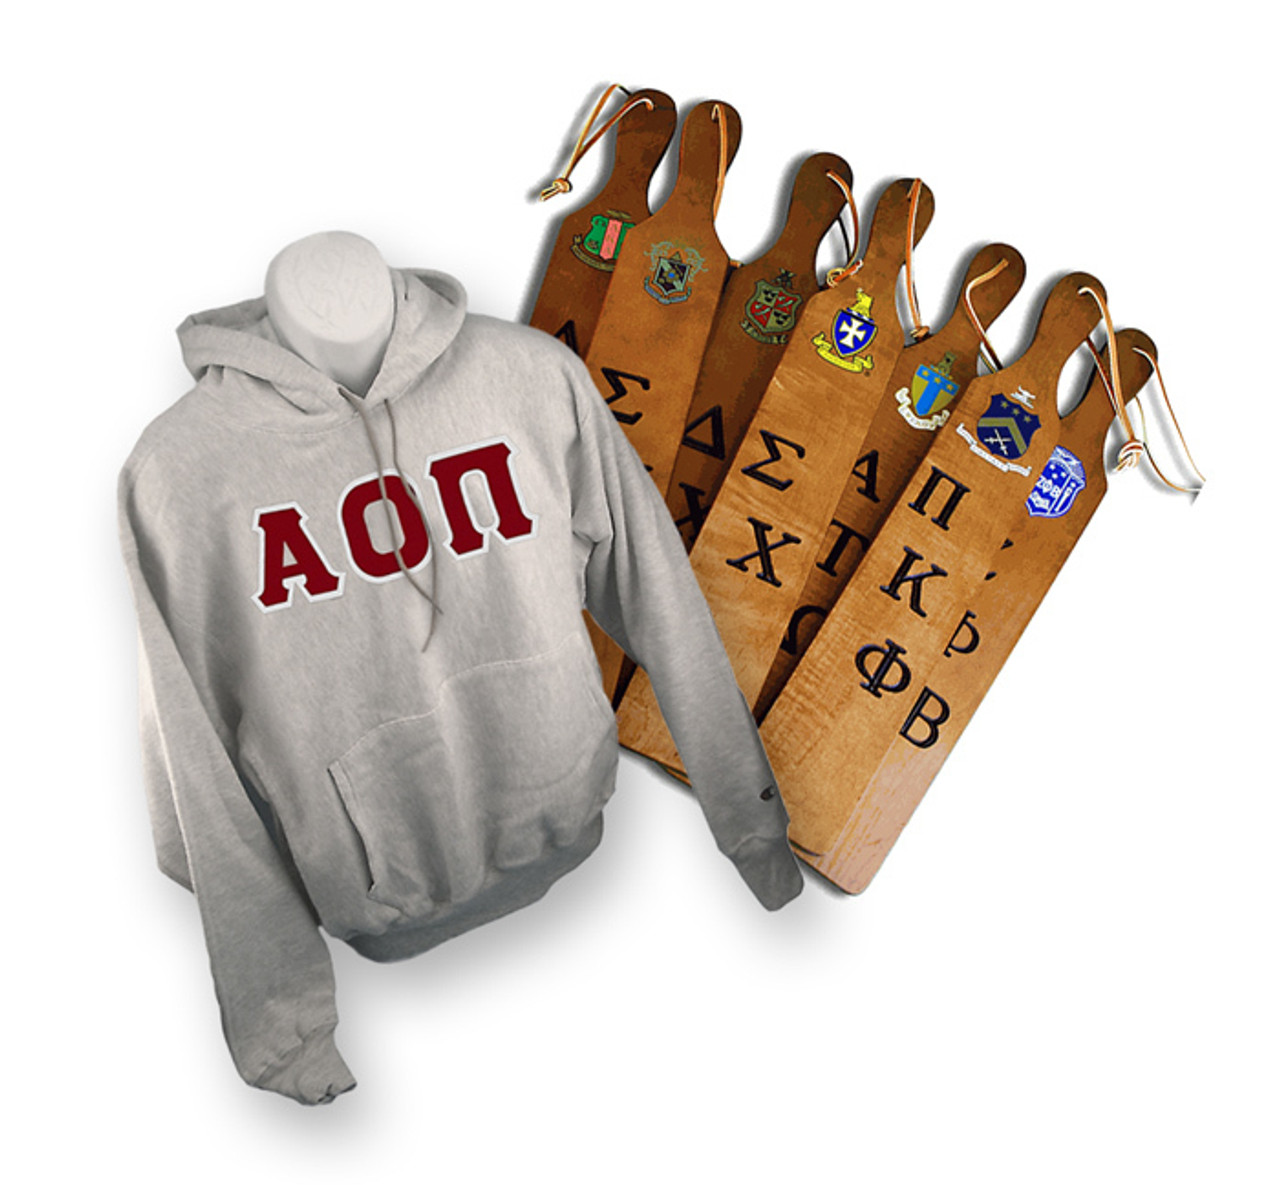 Top Selling Fraternity & Sorority Gifts